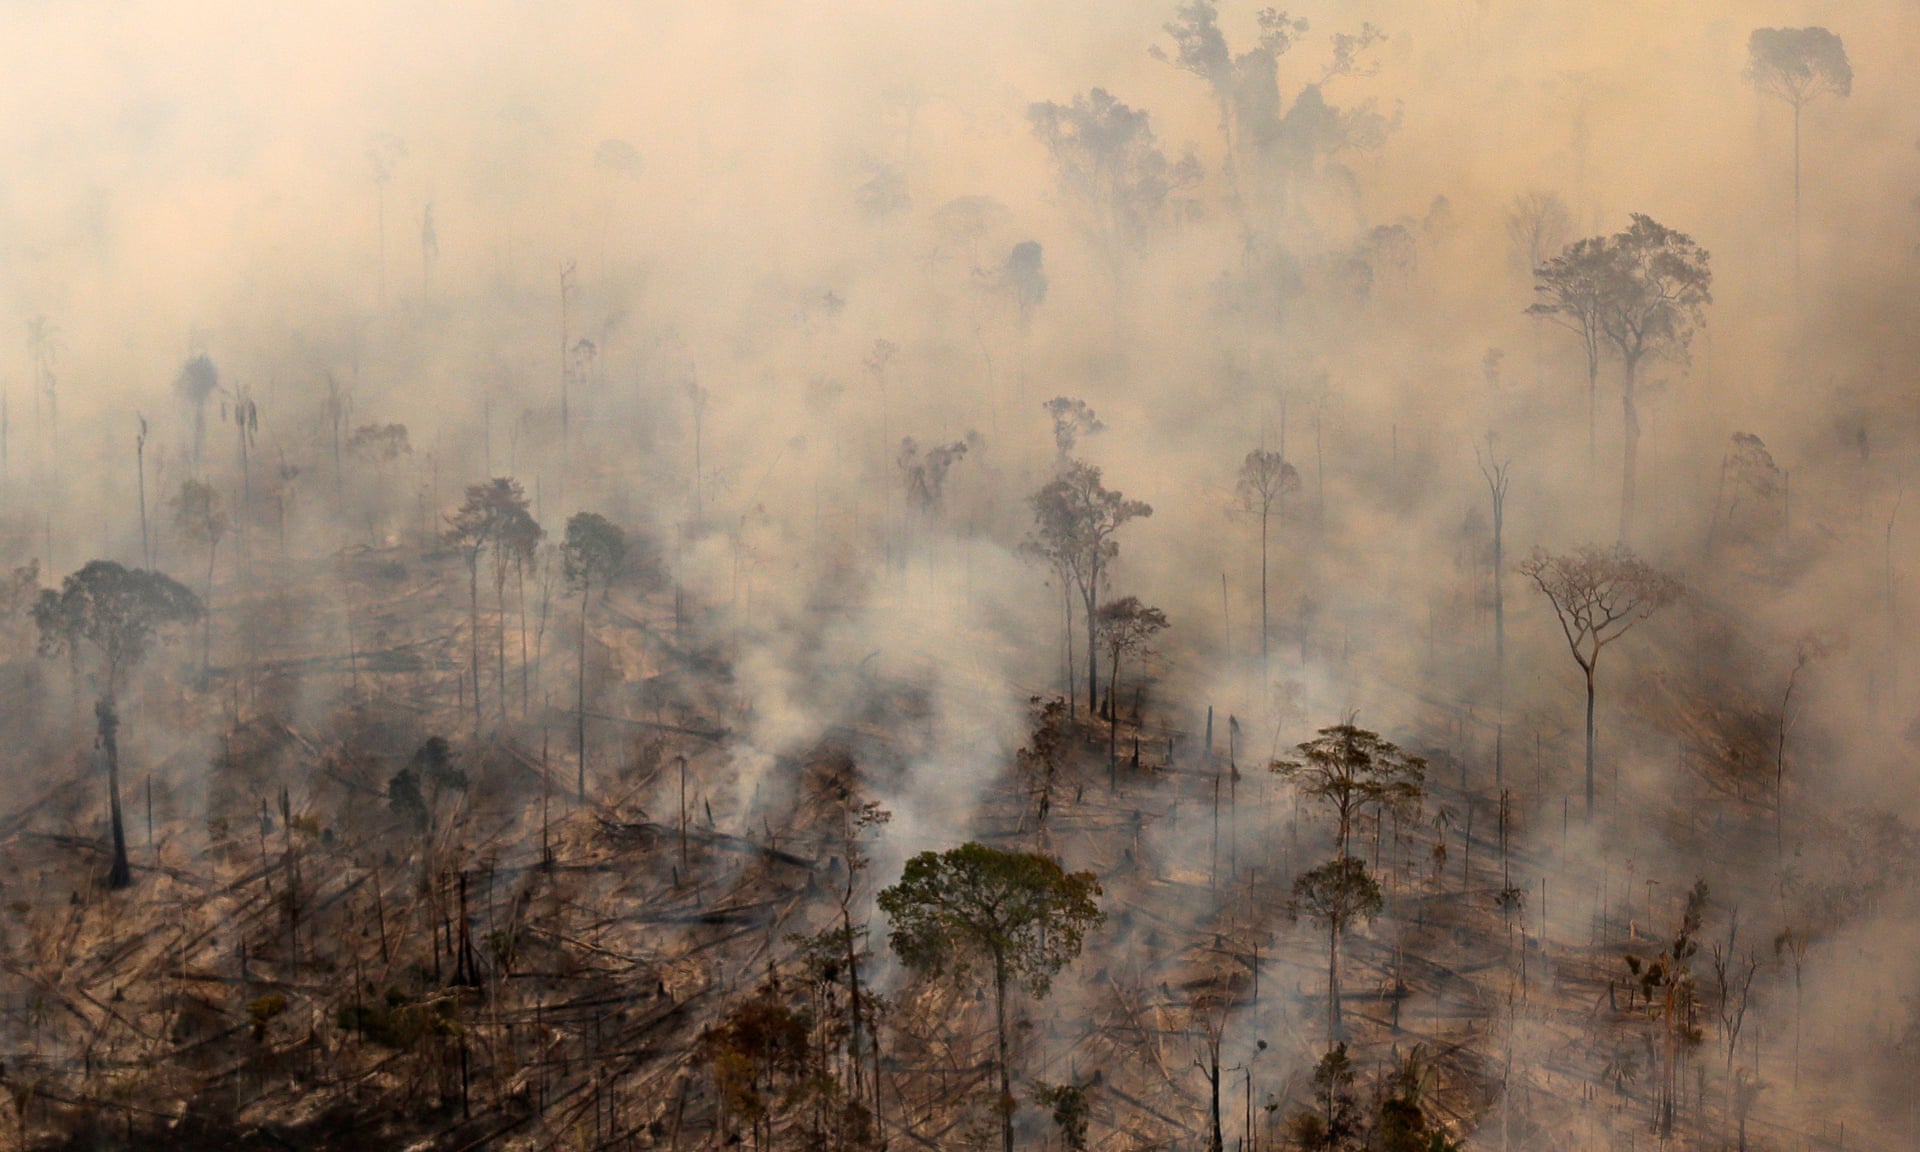 Environmentalists warn deforestation likely to become more acute when Jair Bolsonaro becomes president on 1 January. Photograph: Bruno Kelly/Reuters